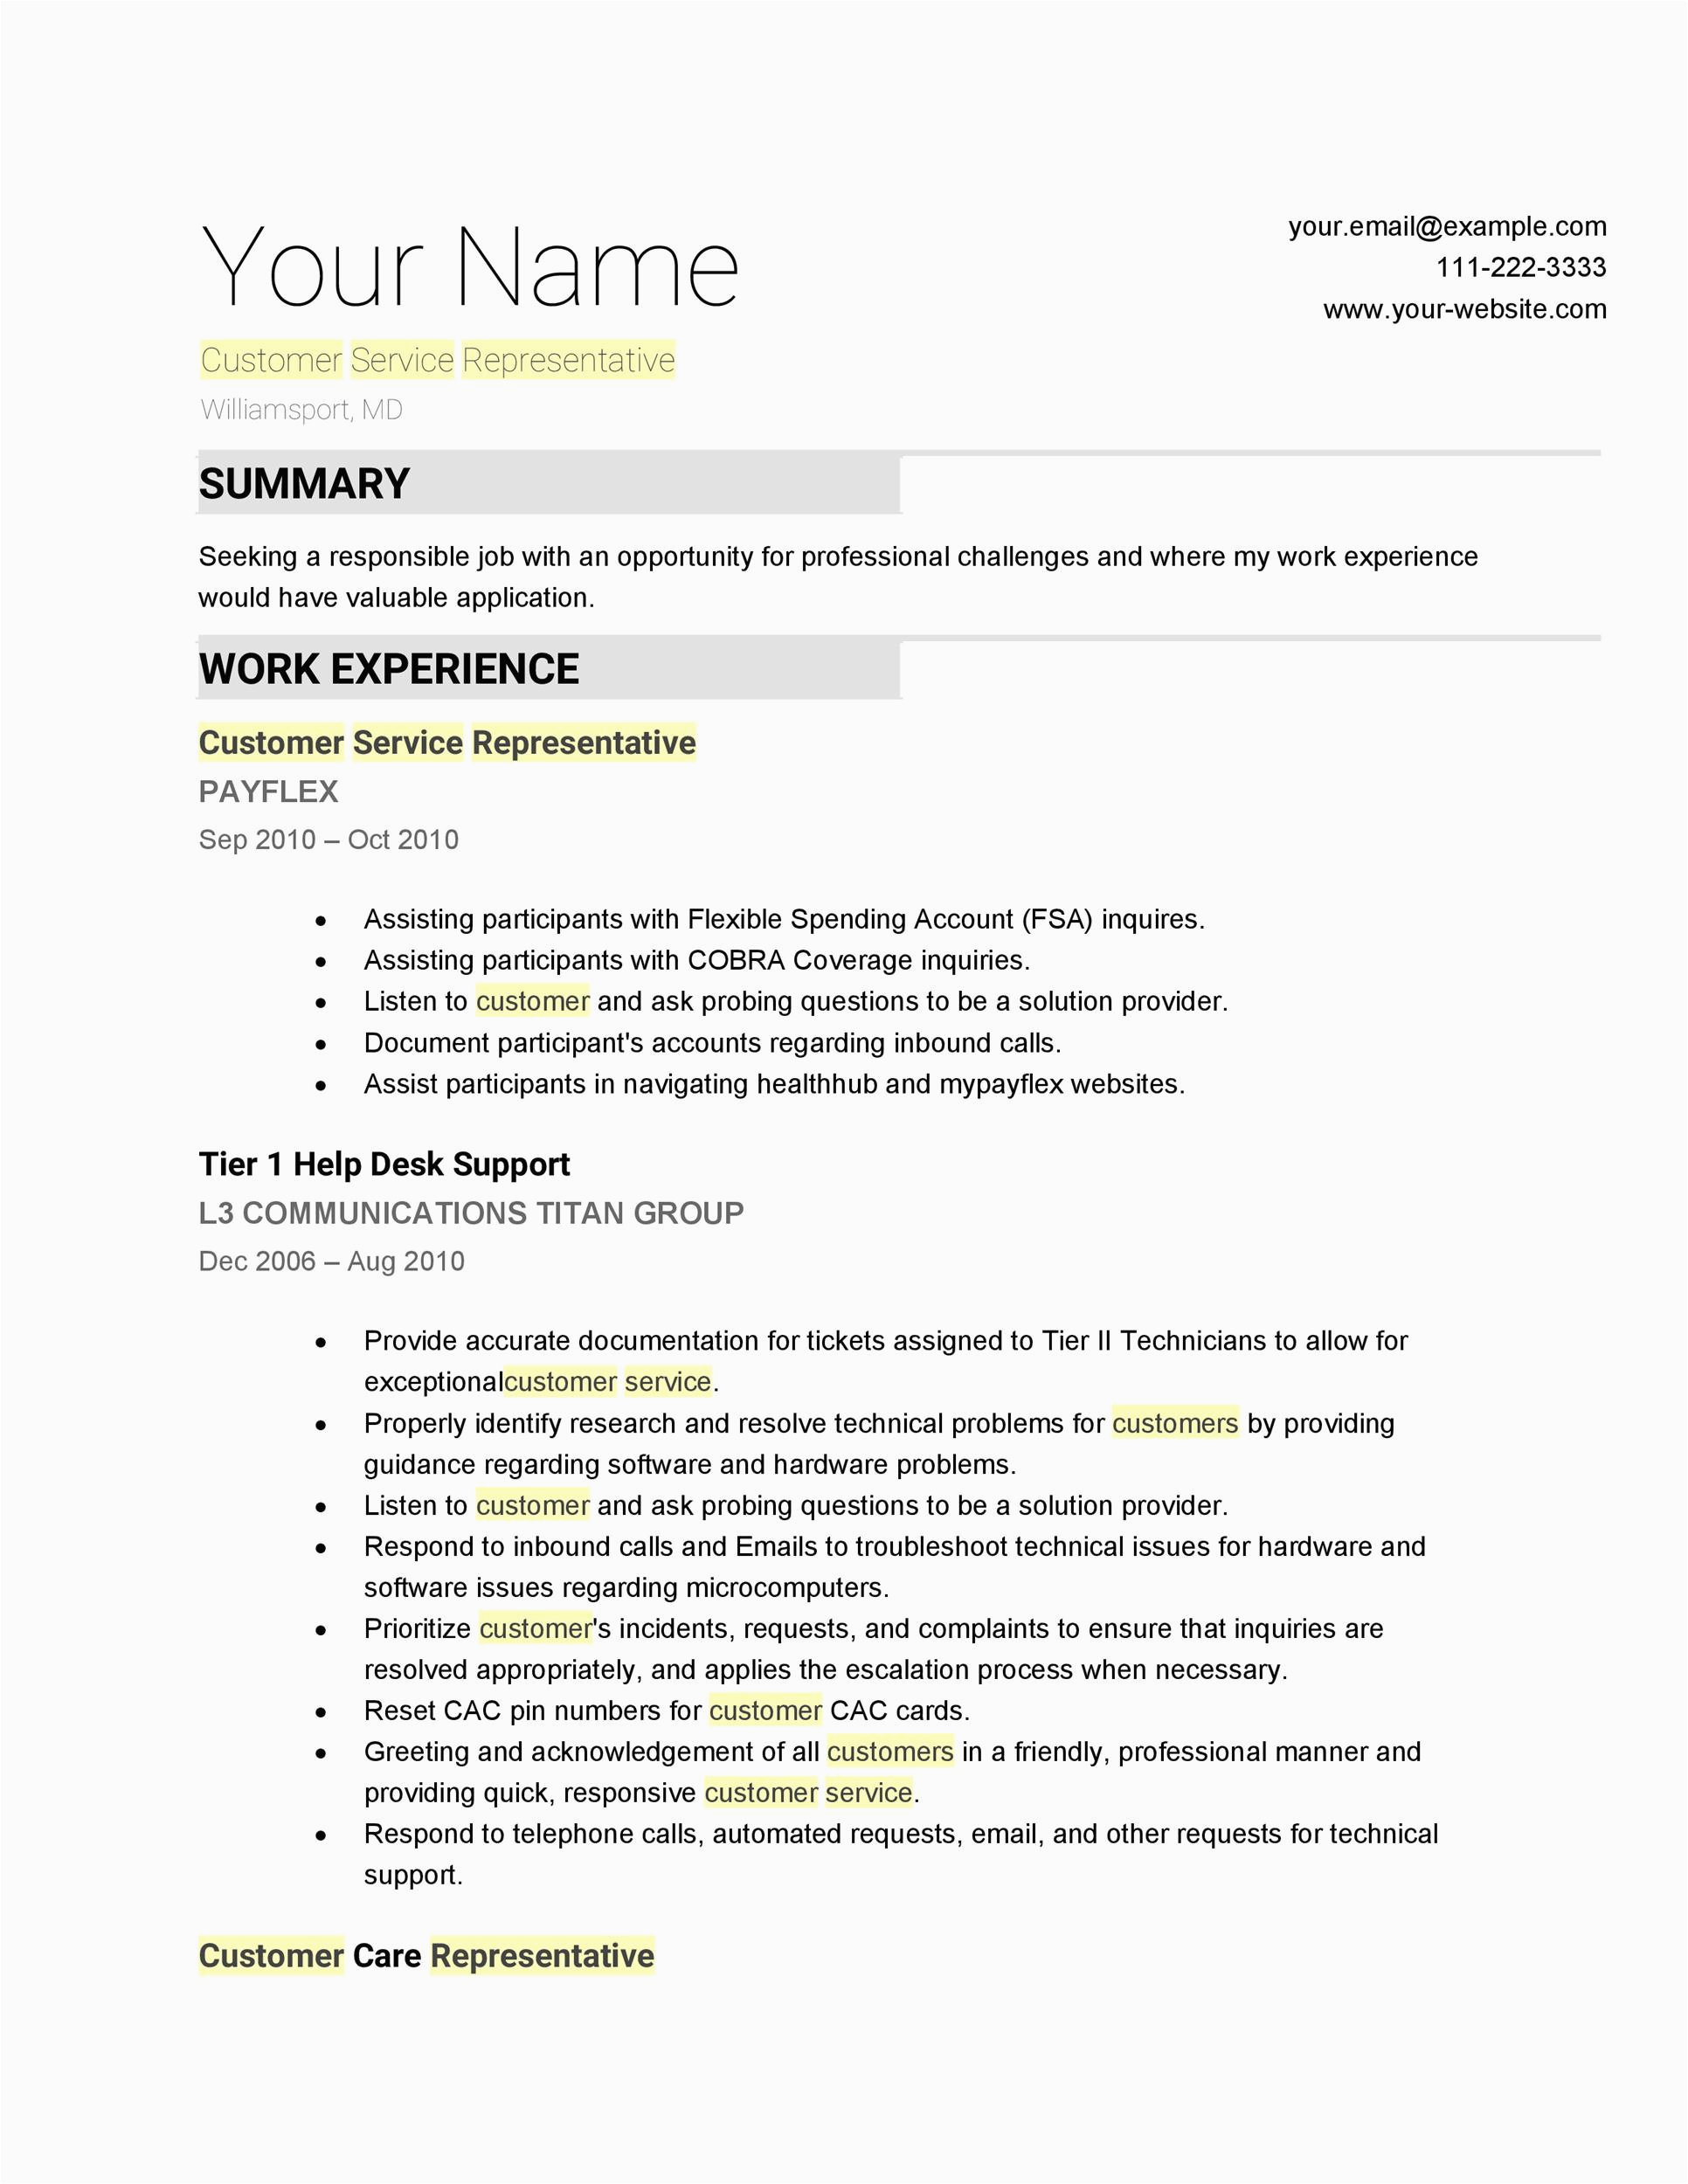 Resume Templates for Customer Service Jobs 30 Customer Service Resume Examples Templatelab